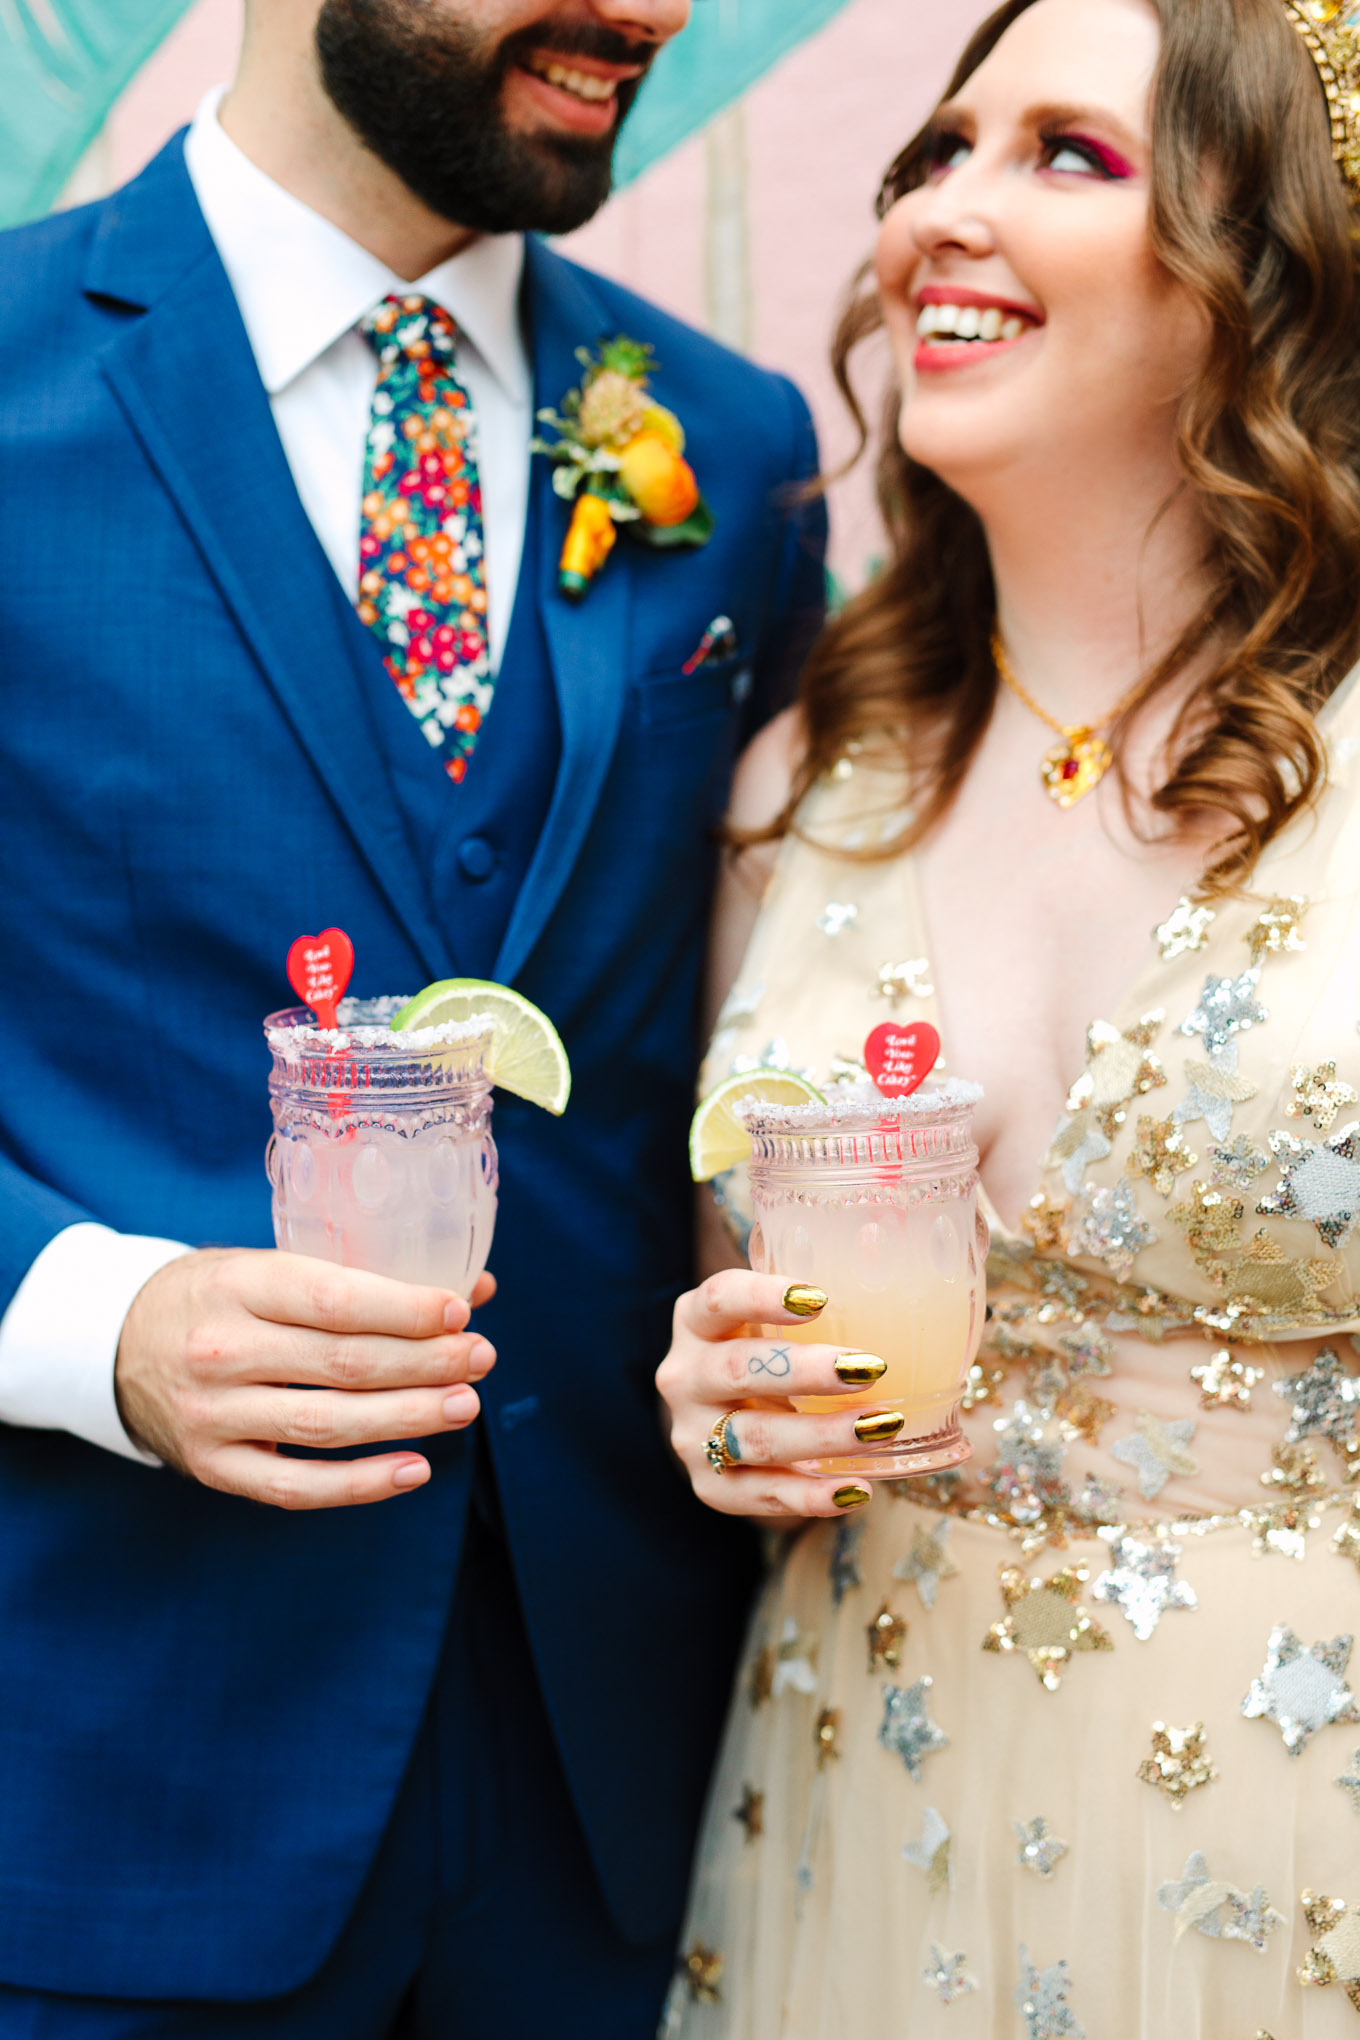 Bride and groom holding signature cocktails | Colorful Downtown Los Angeles Valentine Wedding | Los Angeles wedding photographer | #losangeleswedding #colorfulwedding #DTLA #valentinedtla   Source: Mary Costa Photography | Los Angeles